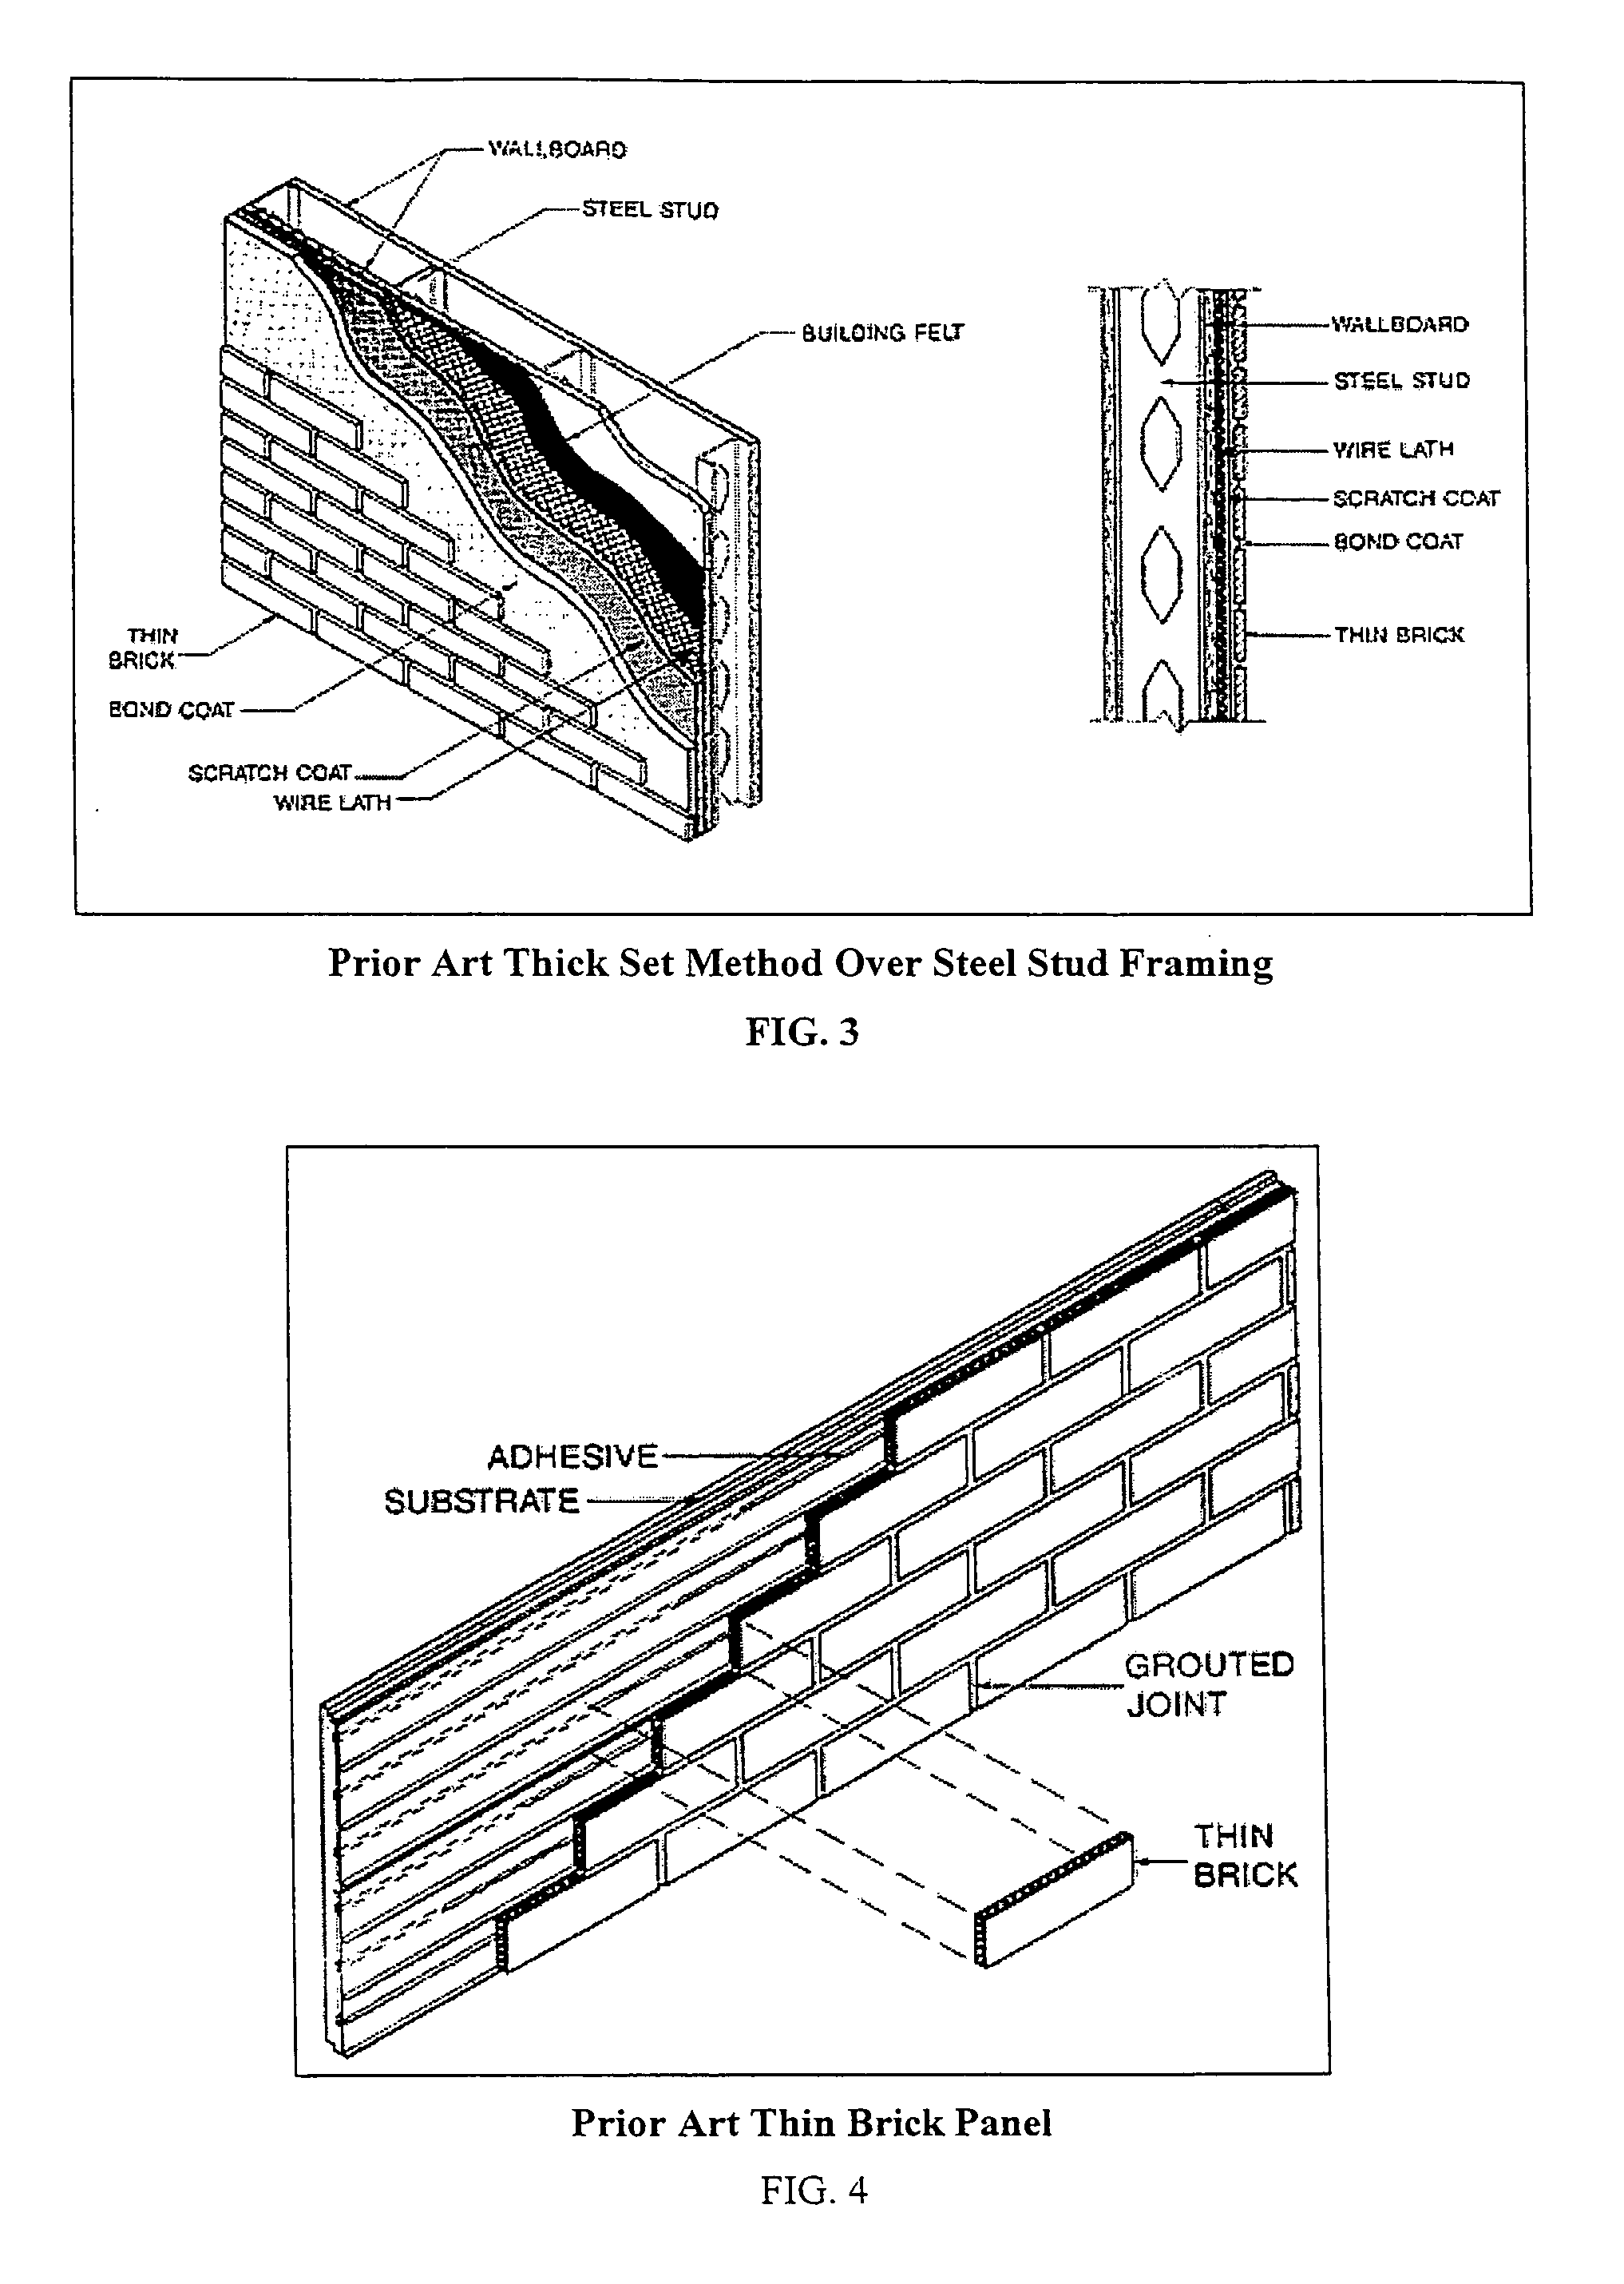 Support panel for thin brick